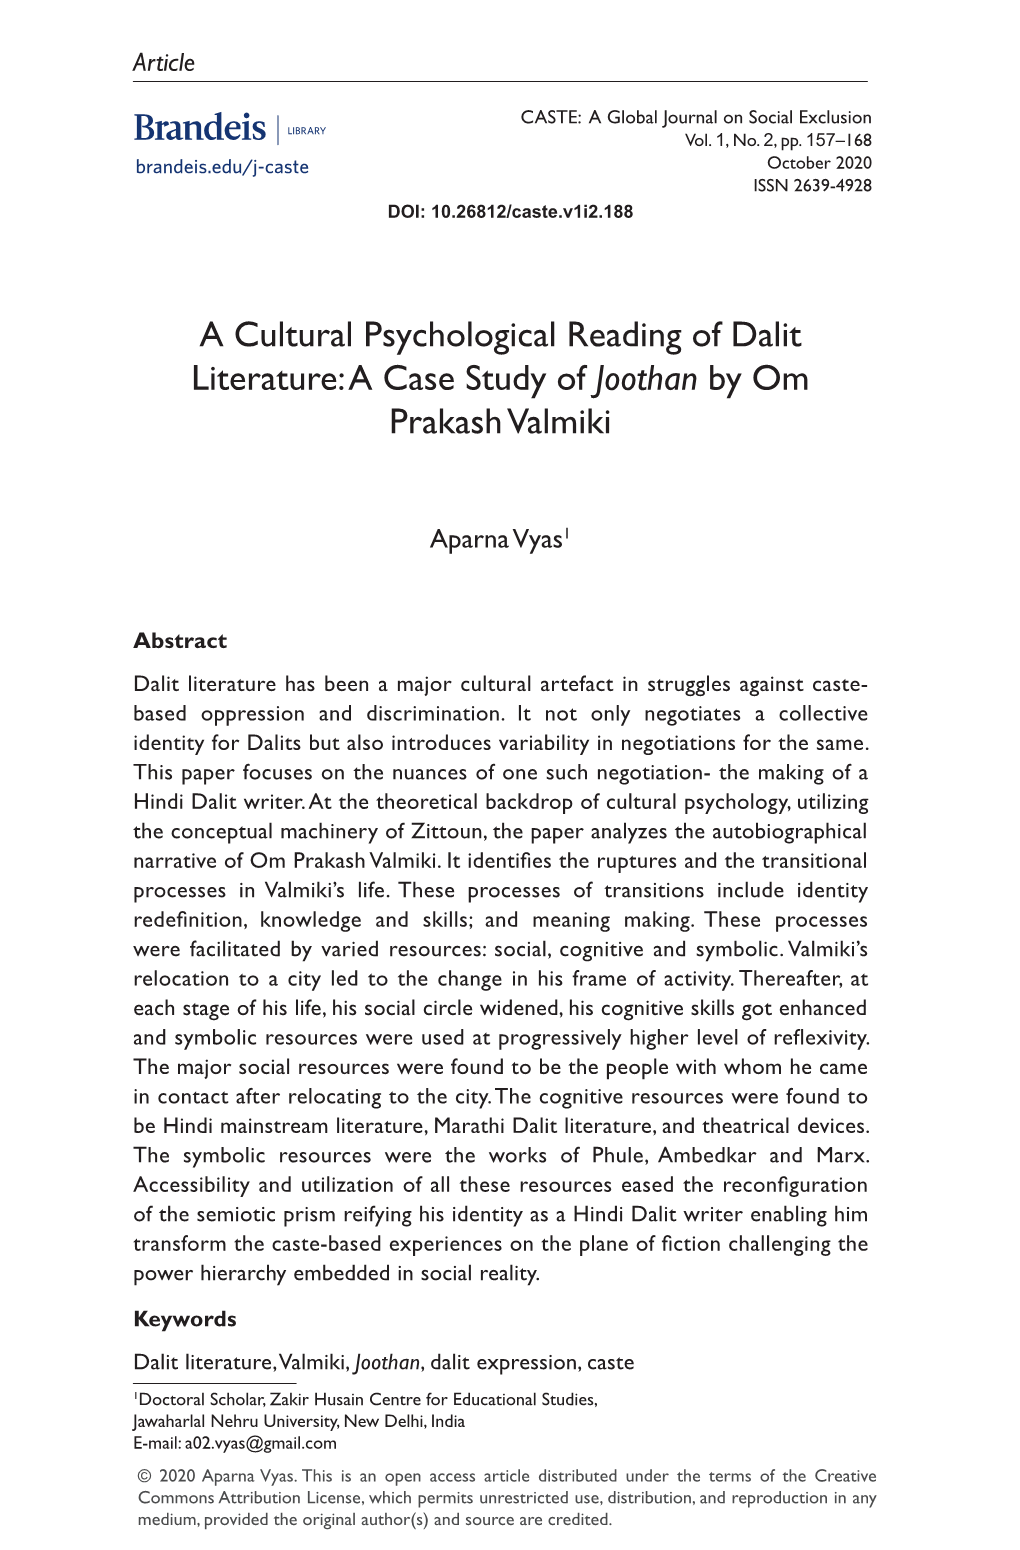 A Cultural Psychological Reading of Dalit Literature: a Case Study of Joothan by Om Prakash Valmiki